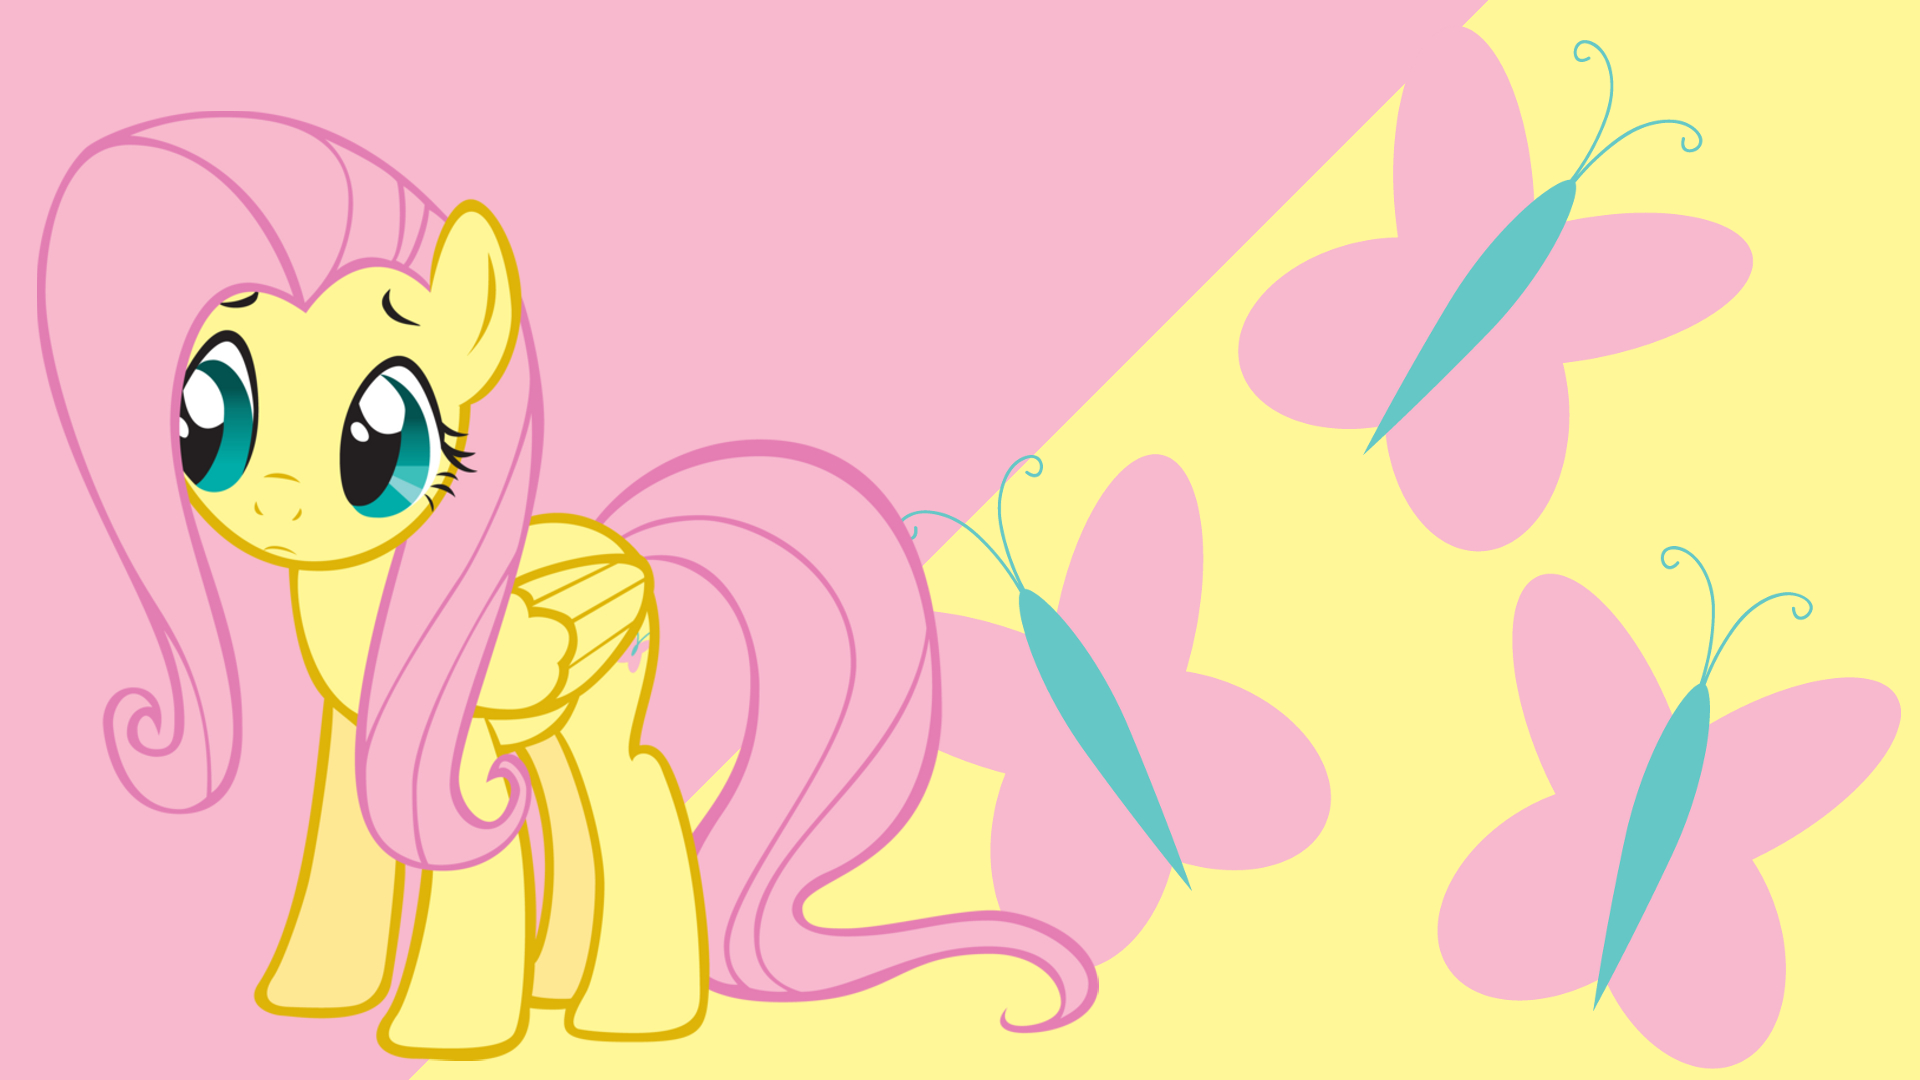 Minimalist Wallpaper 15: Fluttershy by mindnomad, ooklah and Softfang